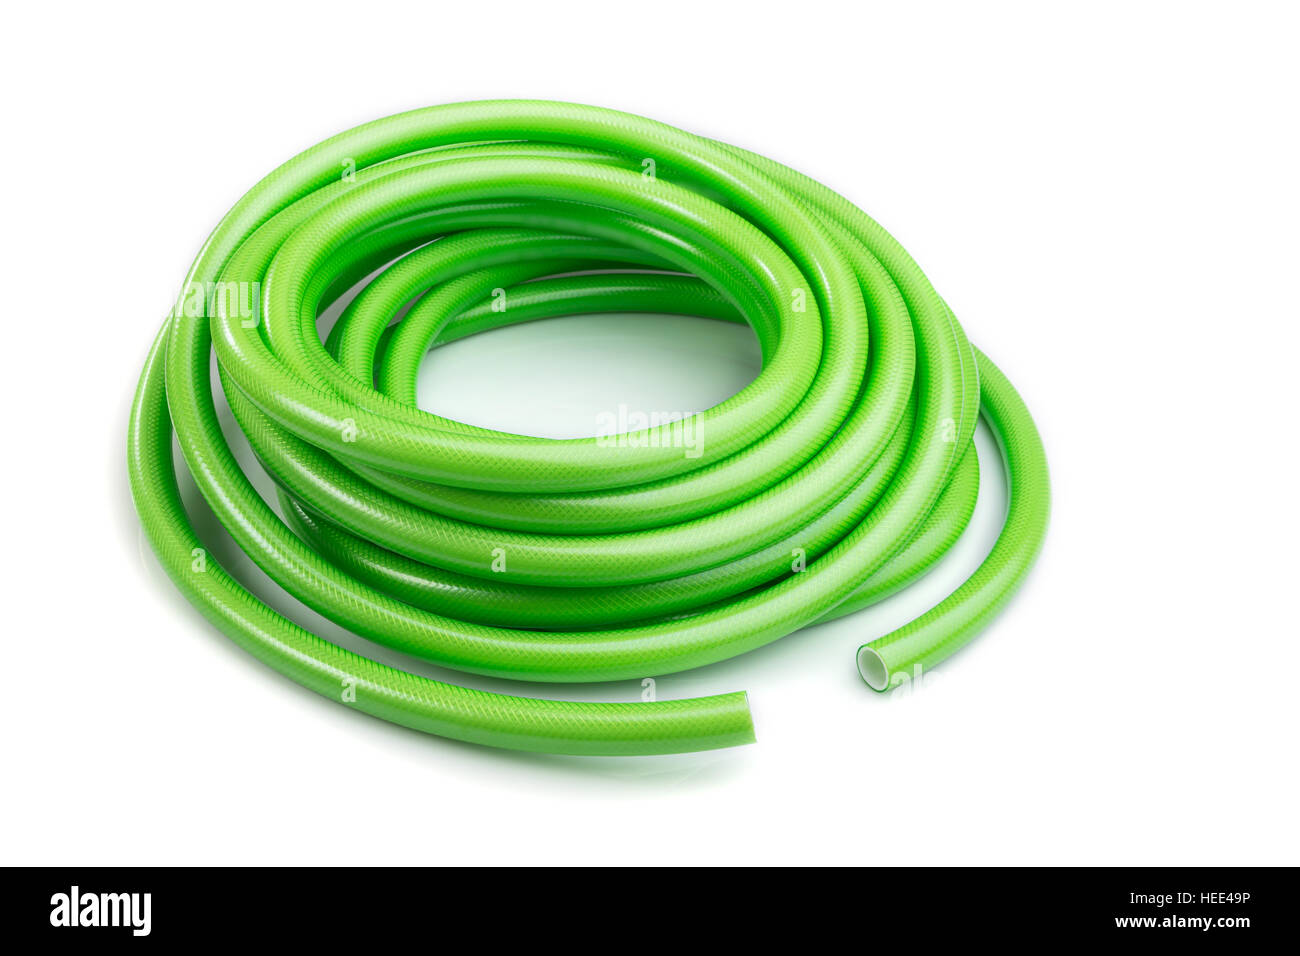 Close up green garden water hose isolated on white background Stock Photo